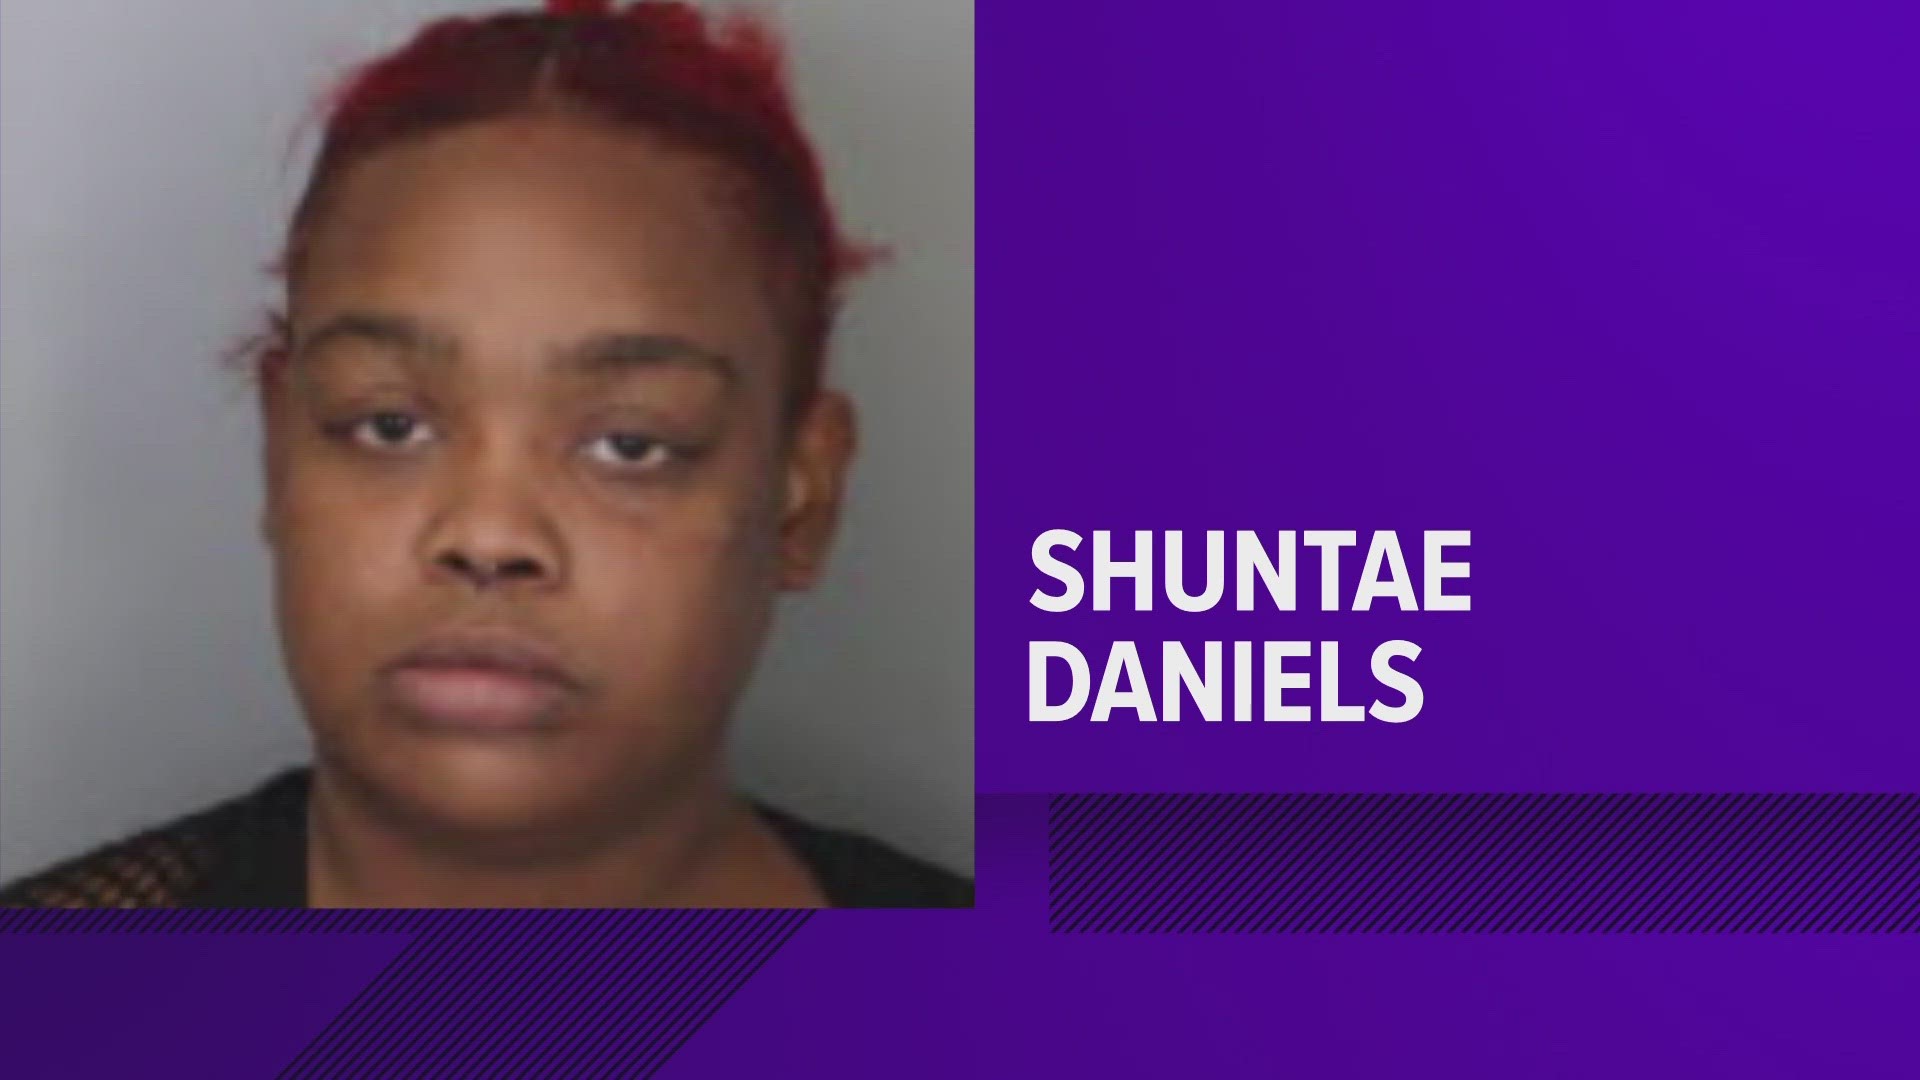 The affidavit said Shuntae Daniels transferred $1,500 to herself from Lesure's phone, spending the money on shoes, hair, and nails.